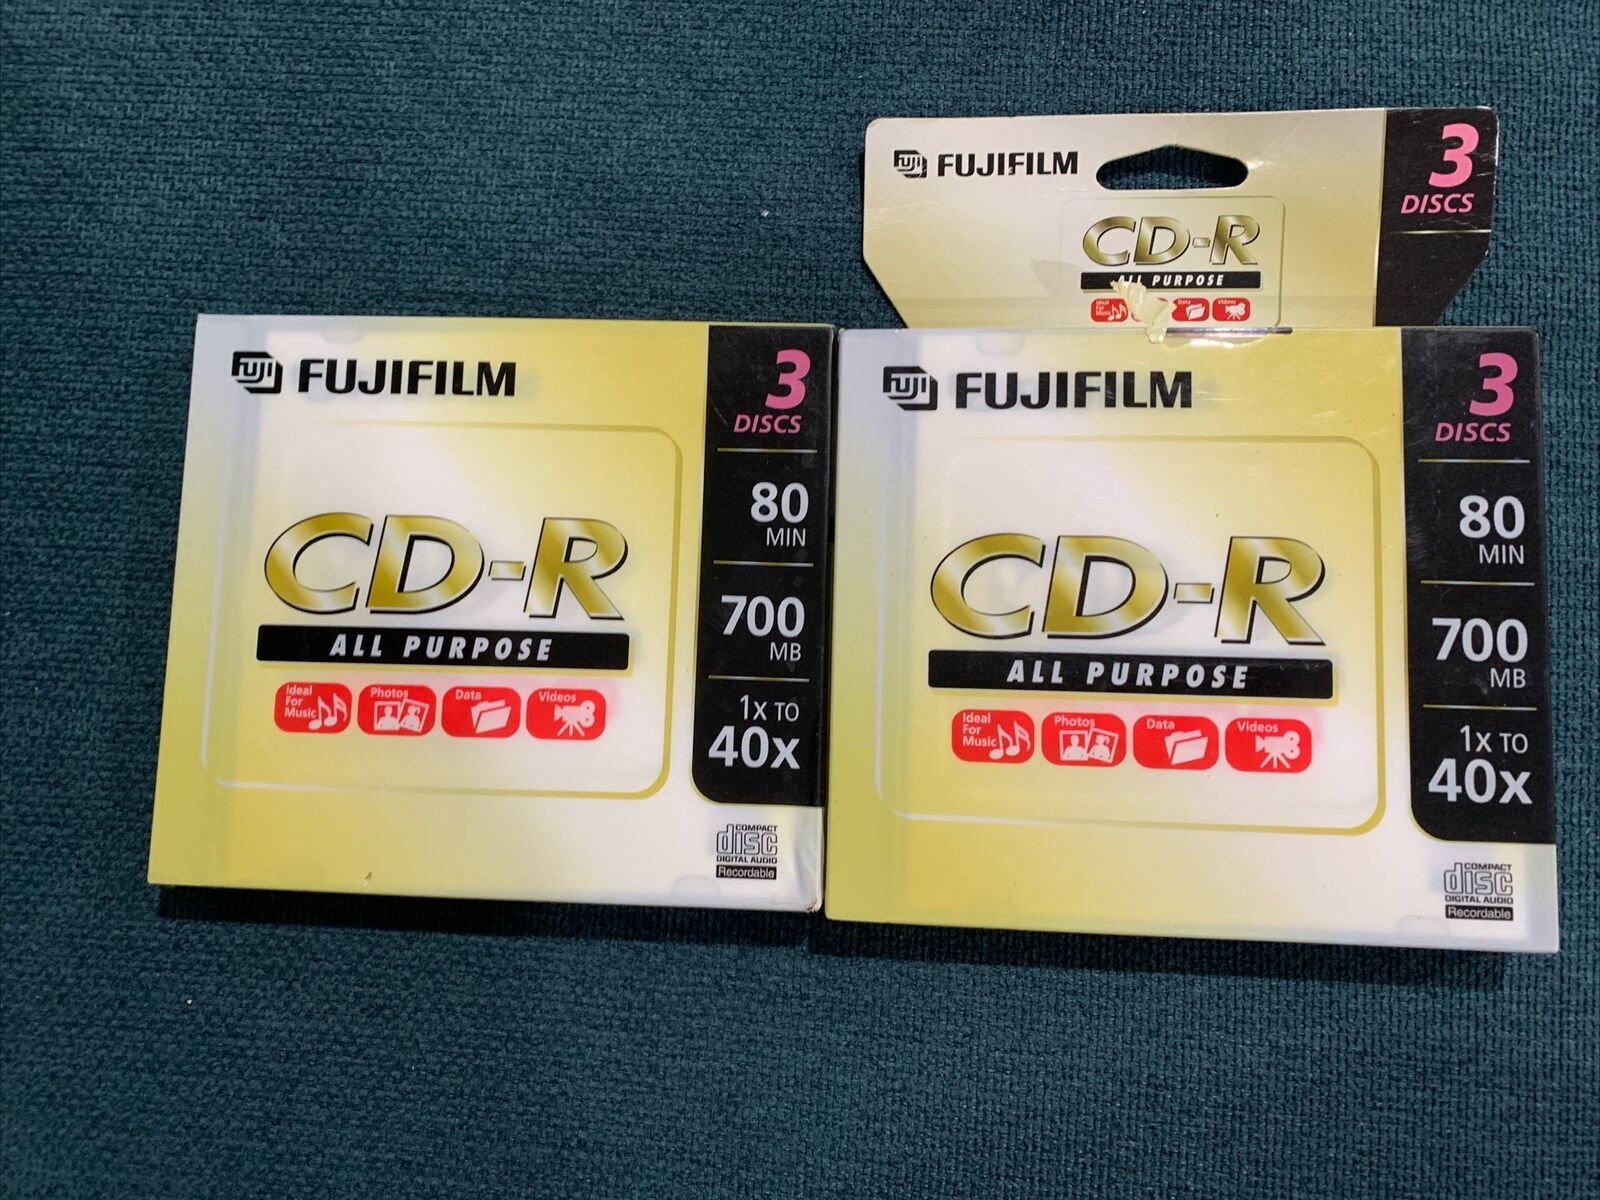 FujiFilm 3-Pack All-Purpose CD-R 80 Min 700 MB Recordable CDs Lot Of 2 Packs